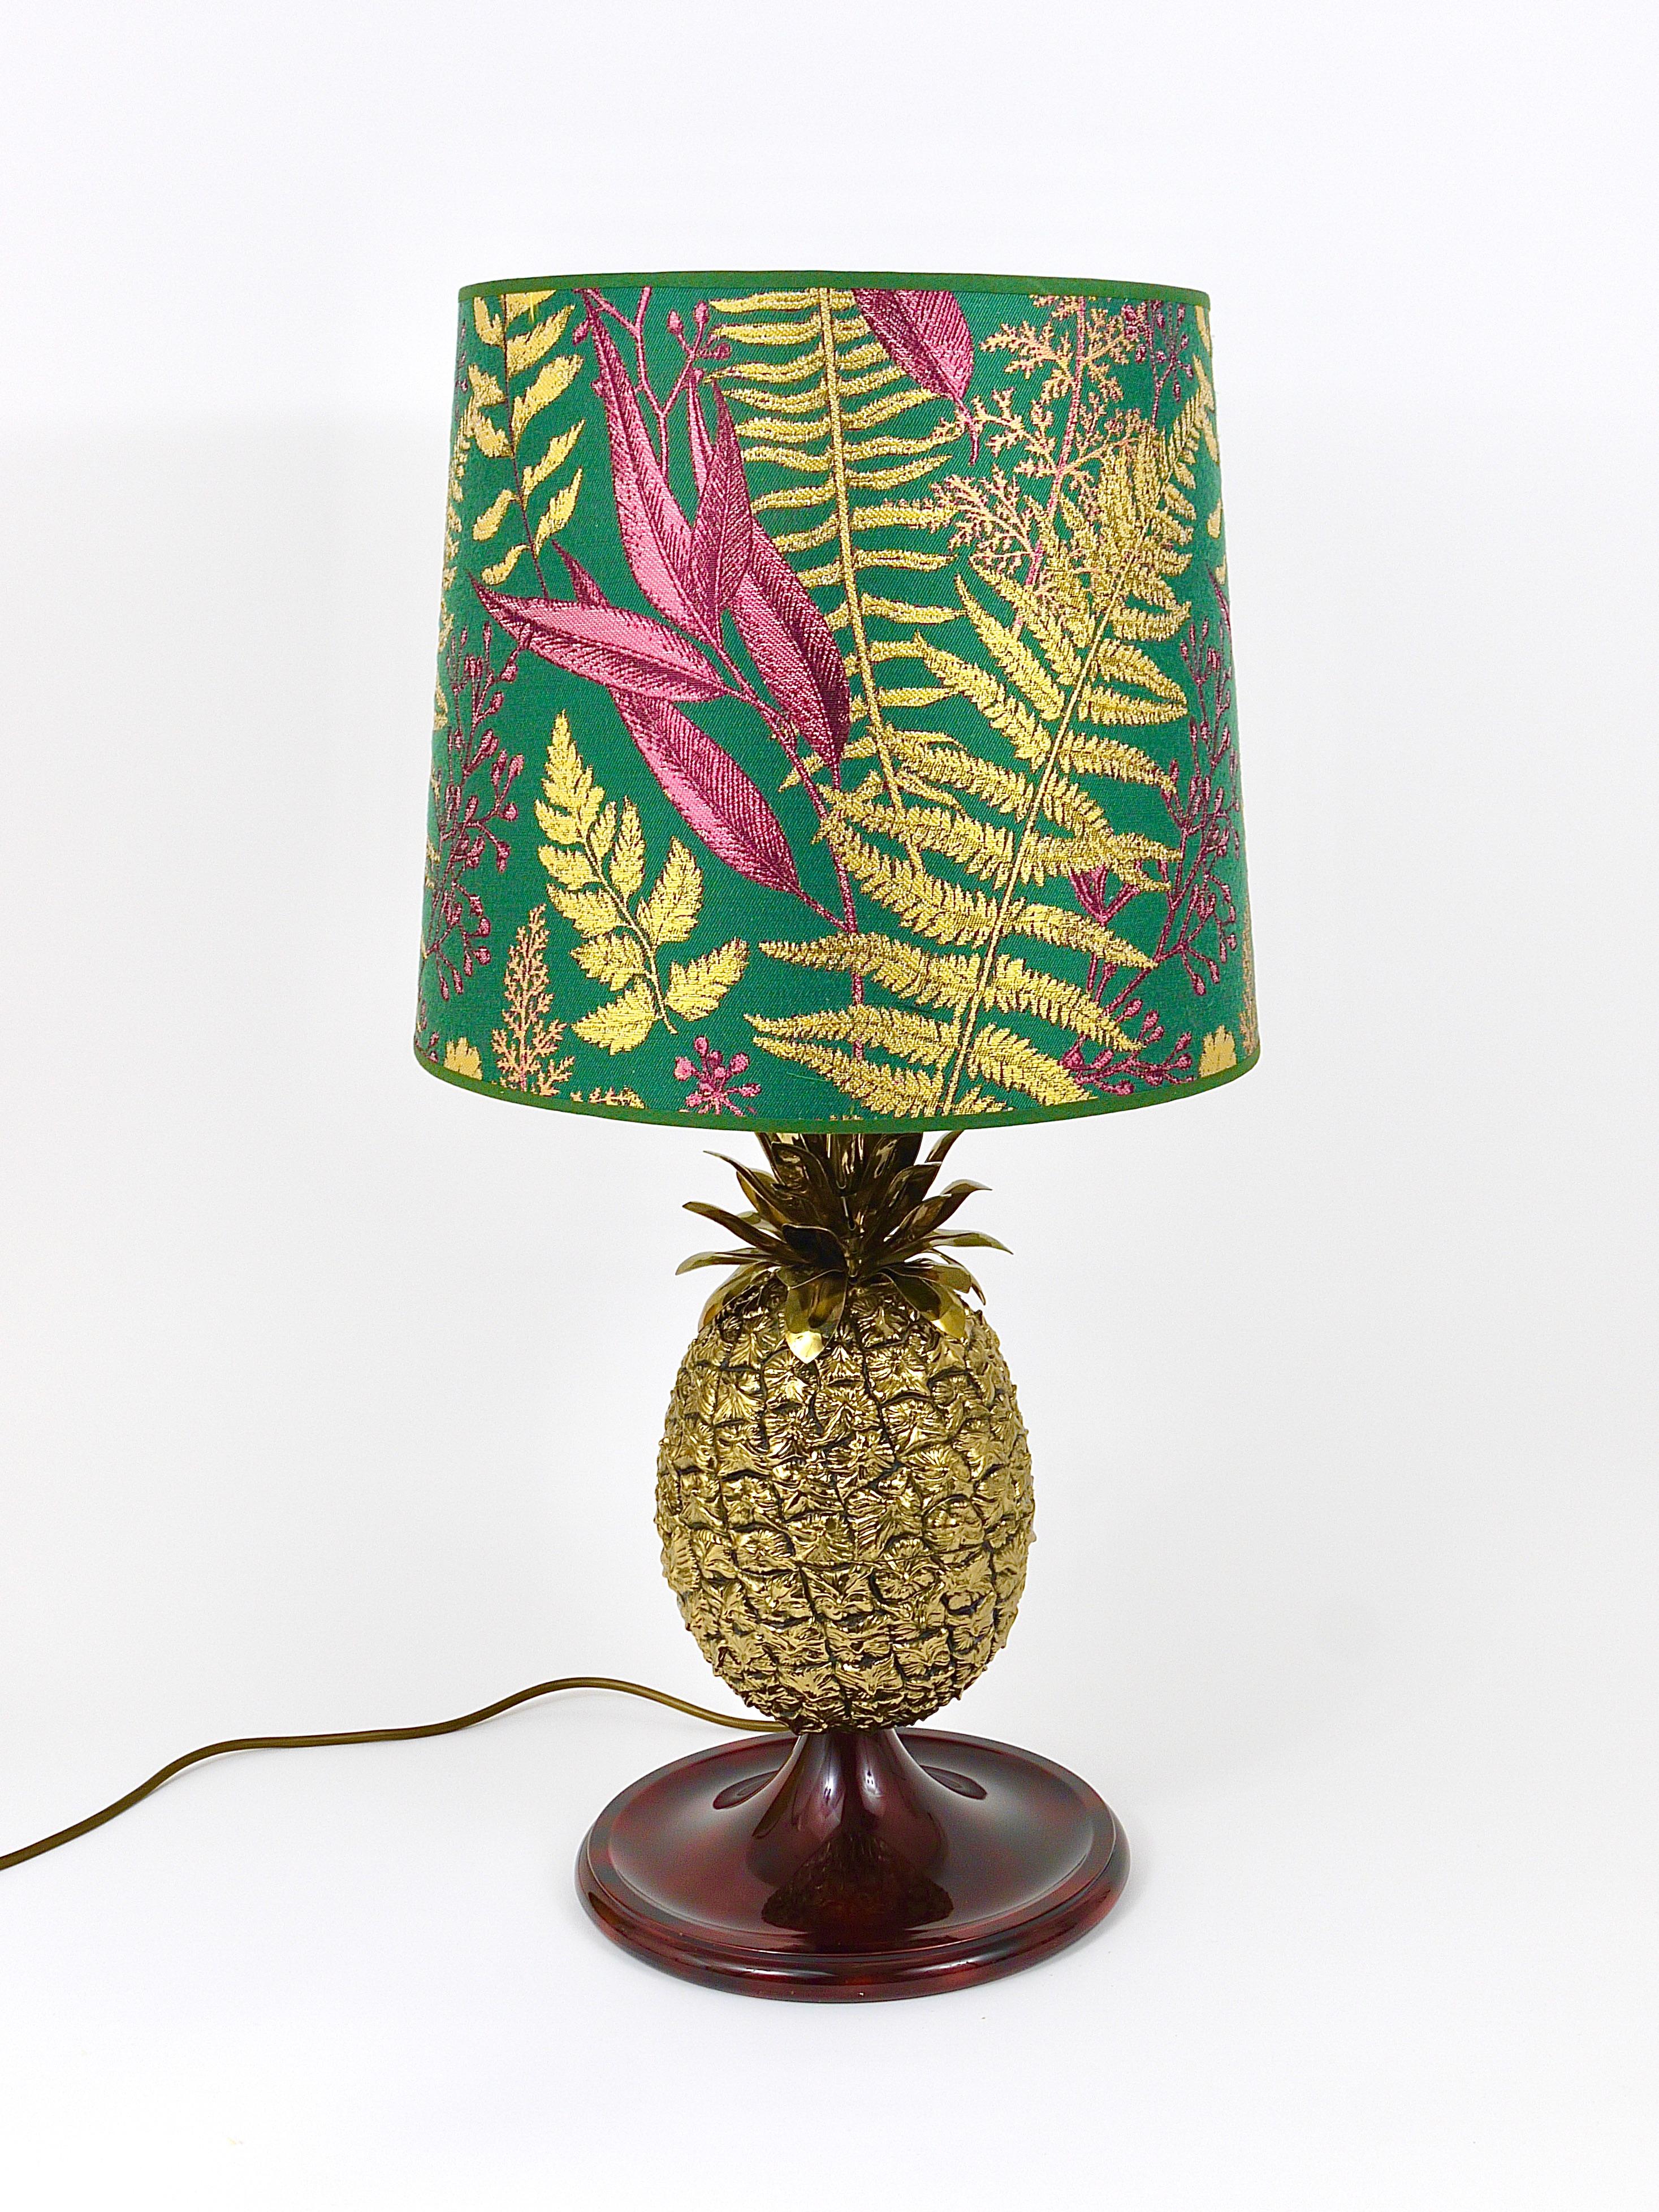 Mauro Manetti Hollywood Regency Pineapple Brass Table Lamp, Italy, 1970s For Sale 4